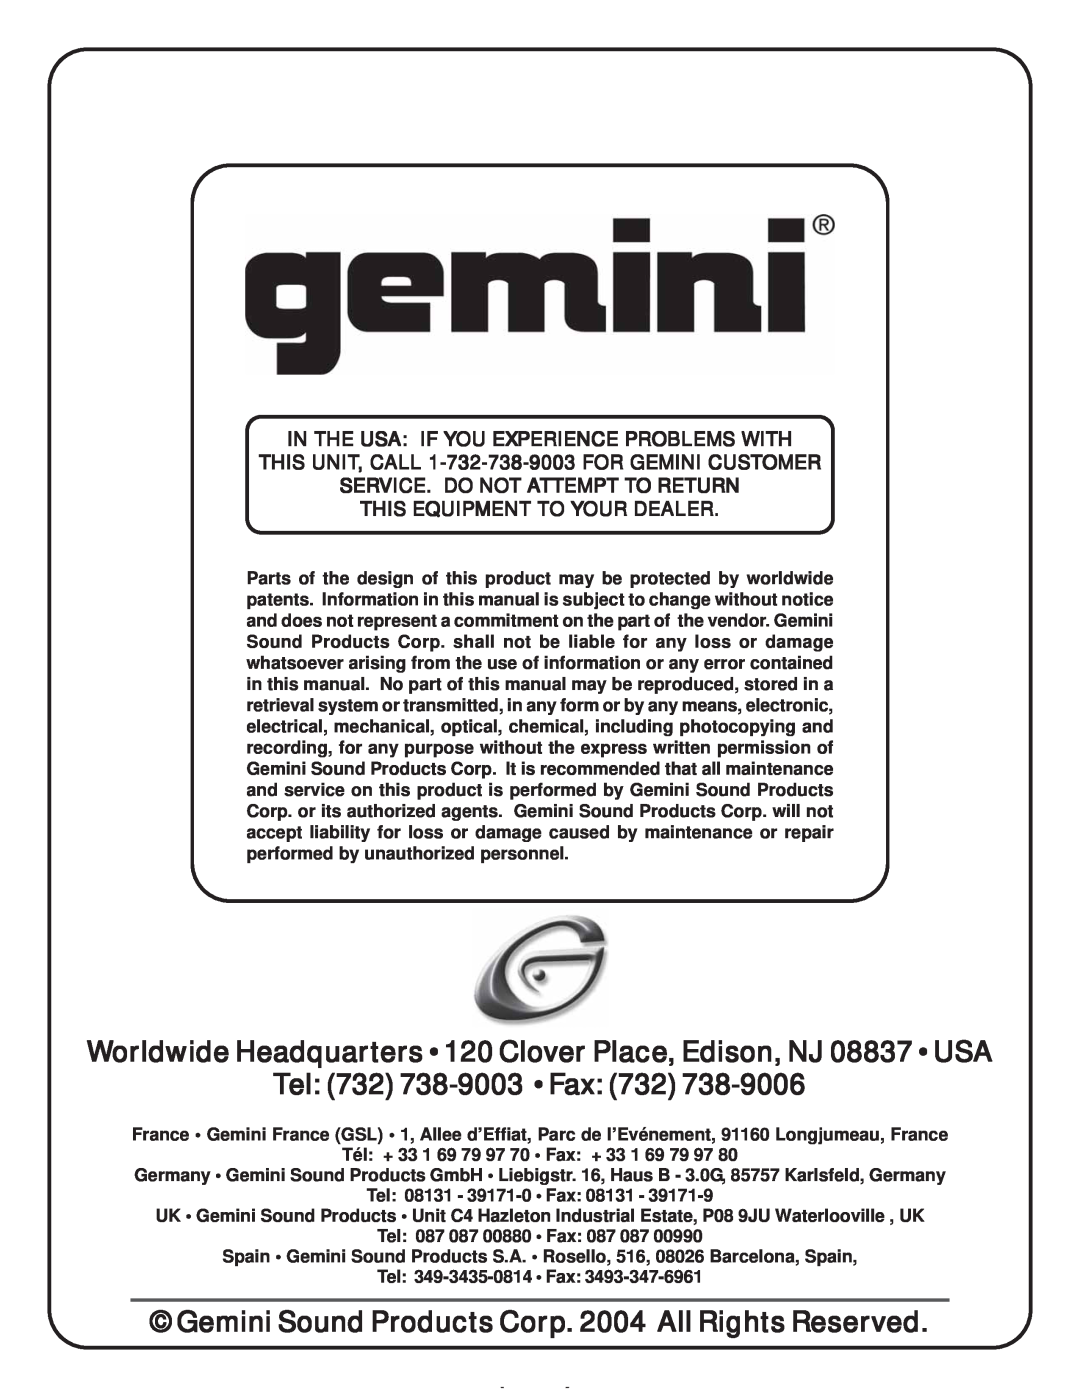 Gemini CDJ-02 manual In The Usa If You Experience Problems With, THIS UNIT, CALL 1-732-738-9003 FOR GEMINI CUSTOMER 